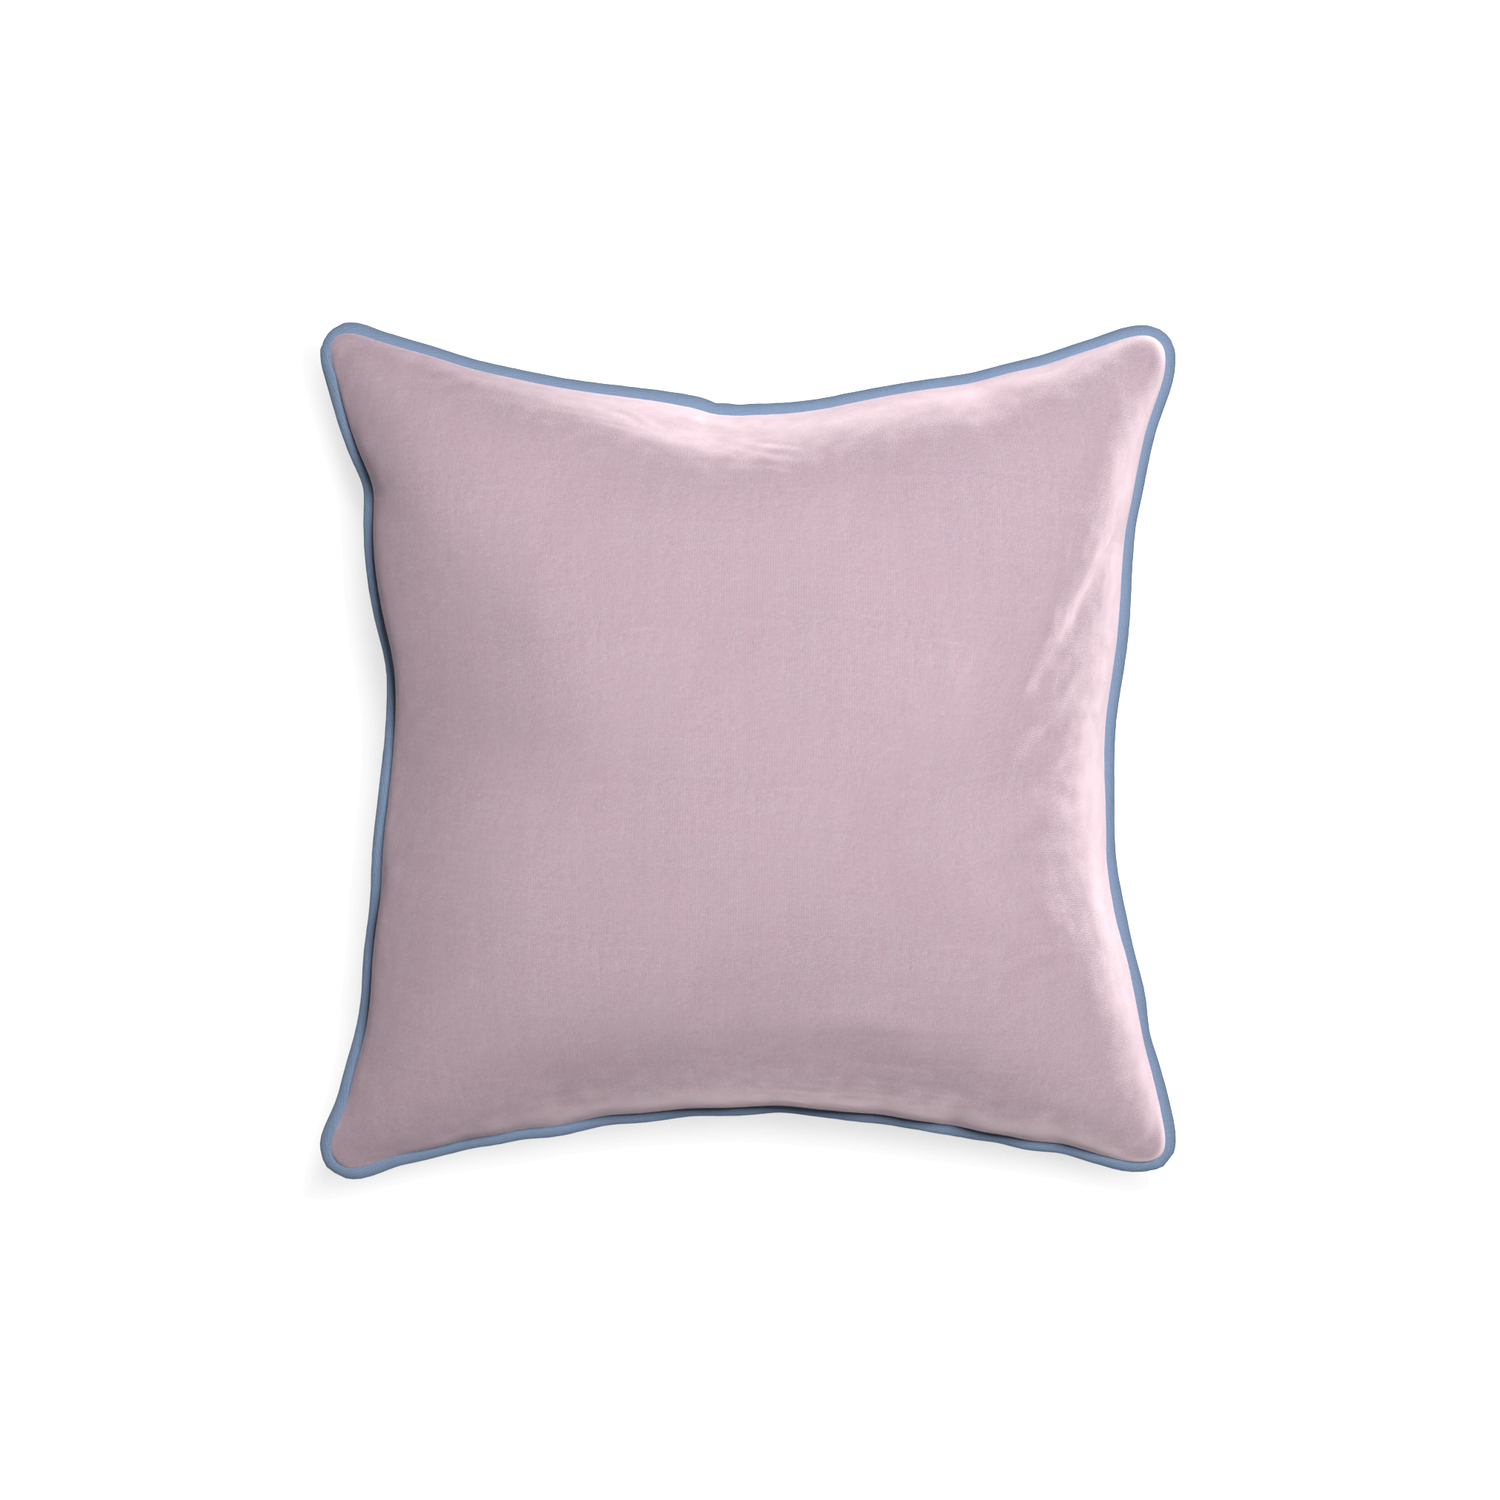 18-square lilac velvet custom lilacpillow with sky piping on white background